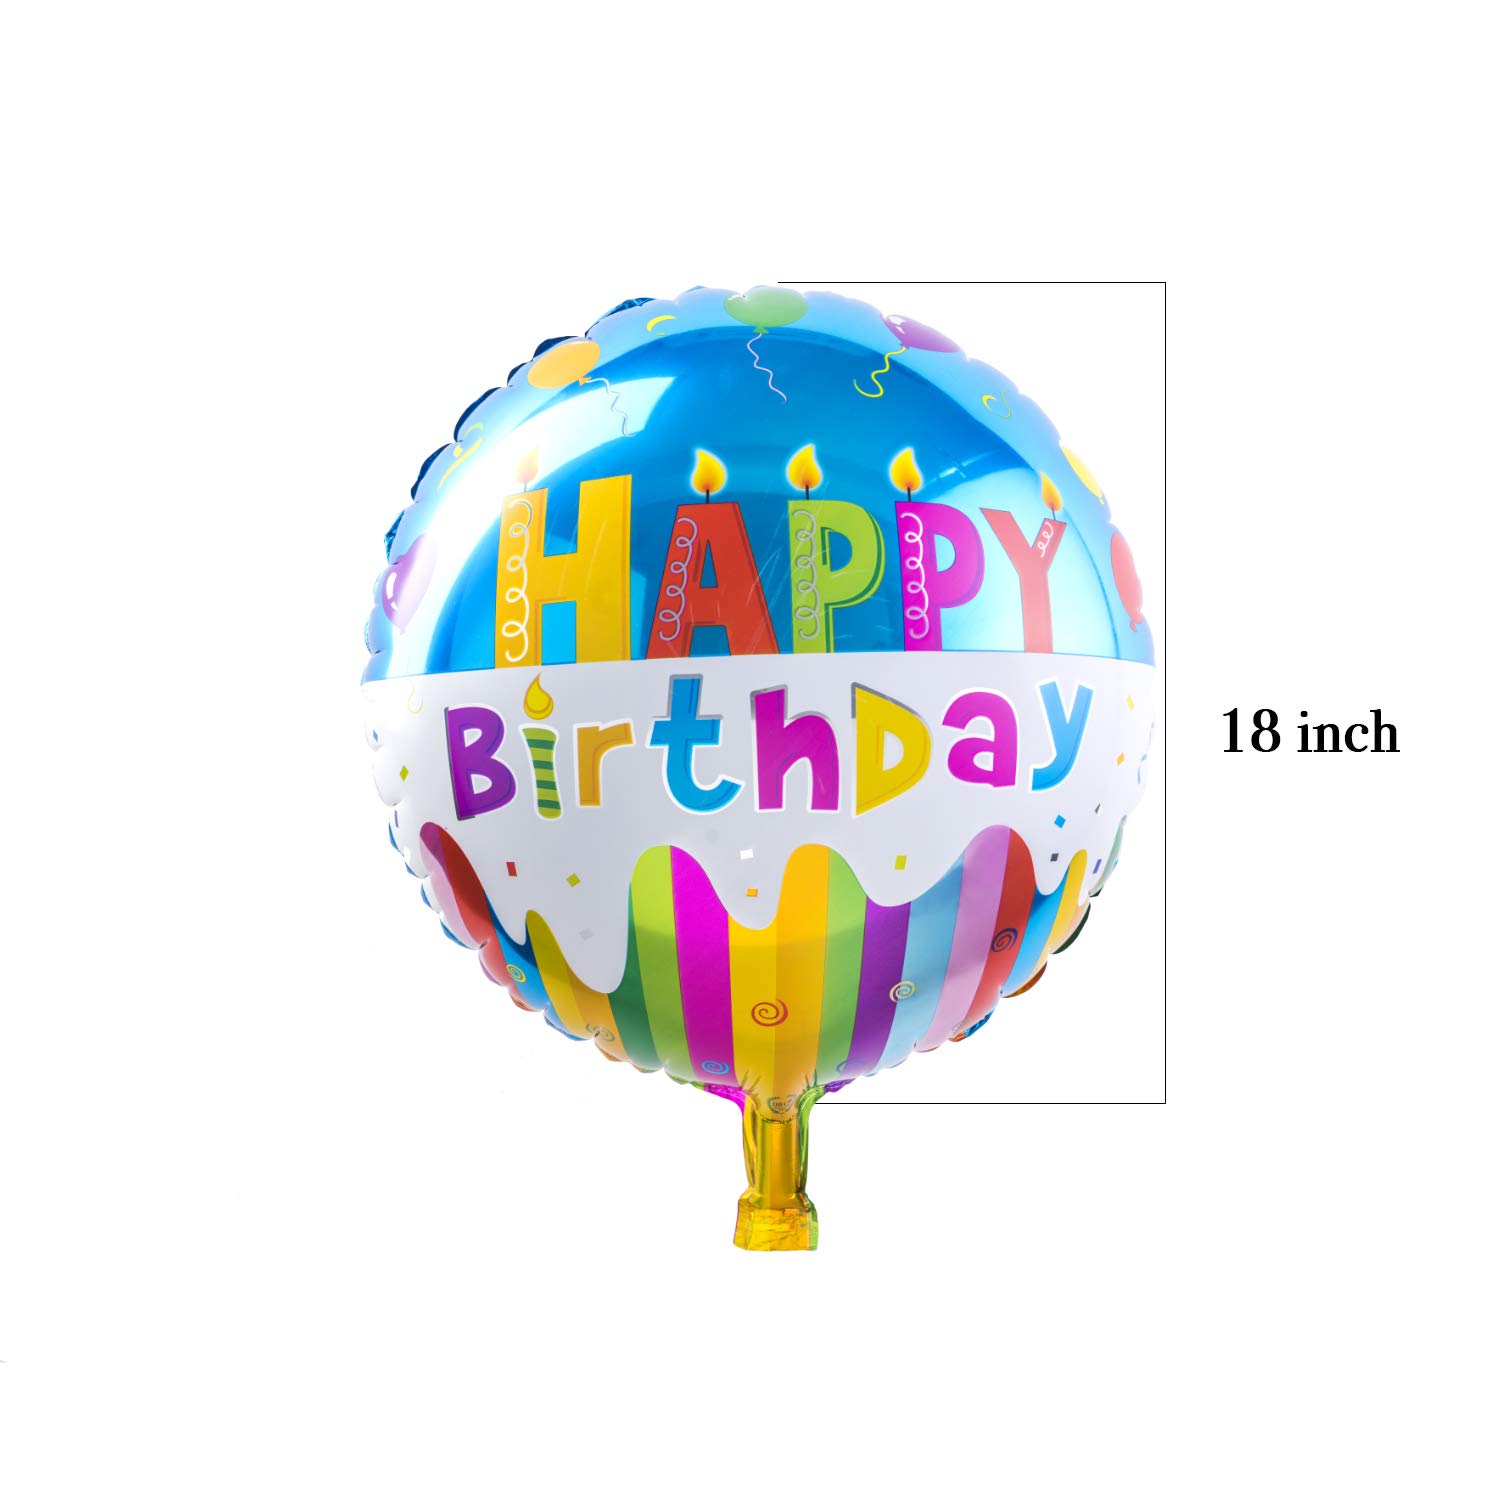 Happy Birthday Aluminum Foil Balloons (50-Pieces) Helium Floating Mylar Balloon Party Decoration Supplies - 18 Inches Round Inflatable Balloons